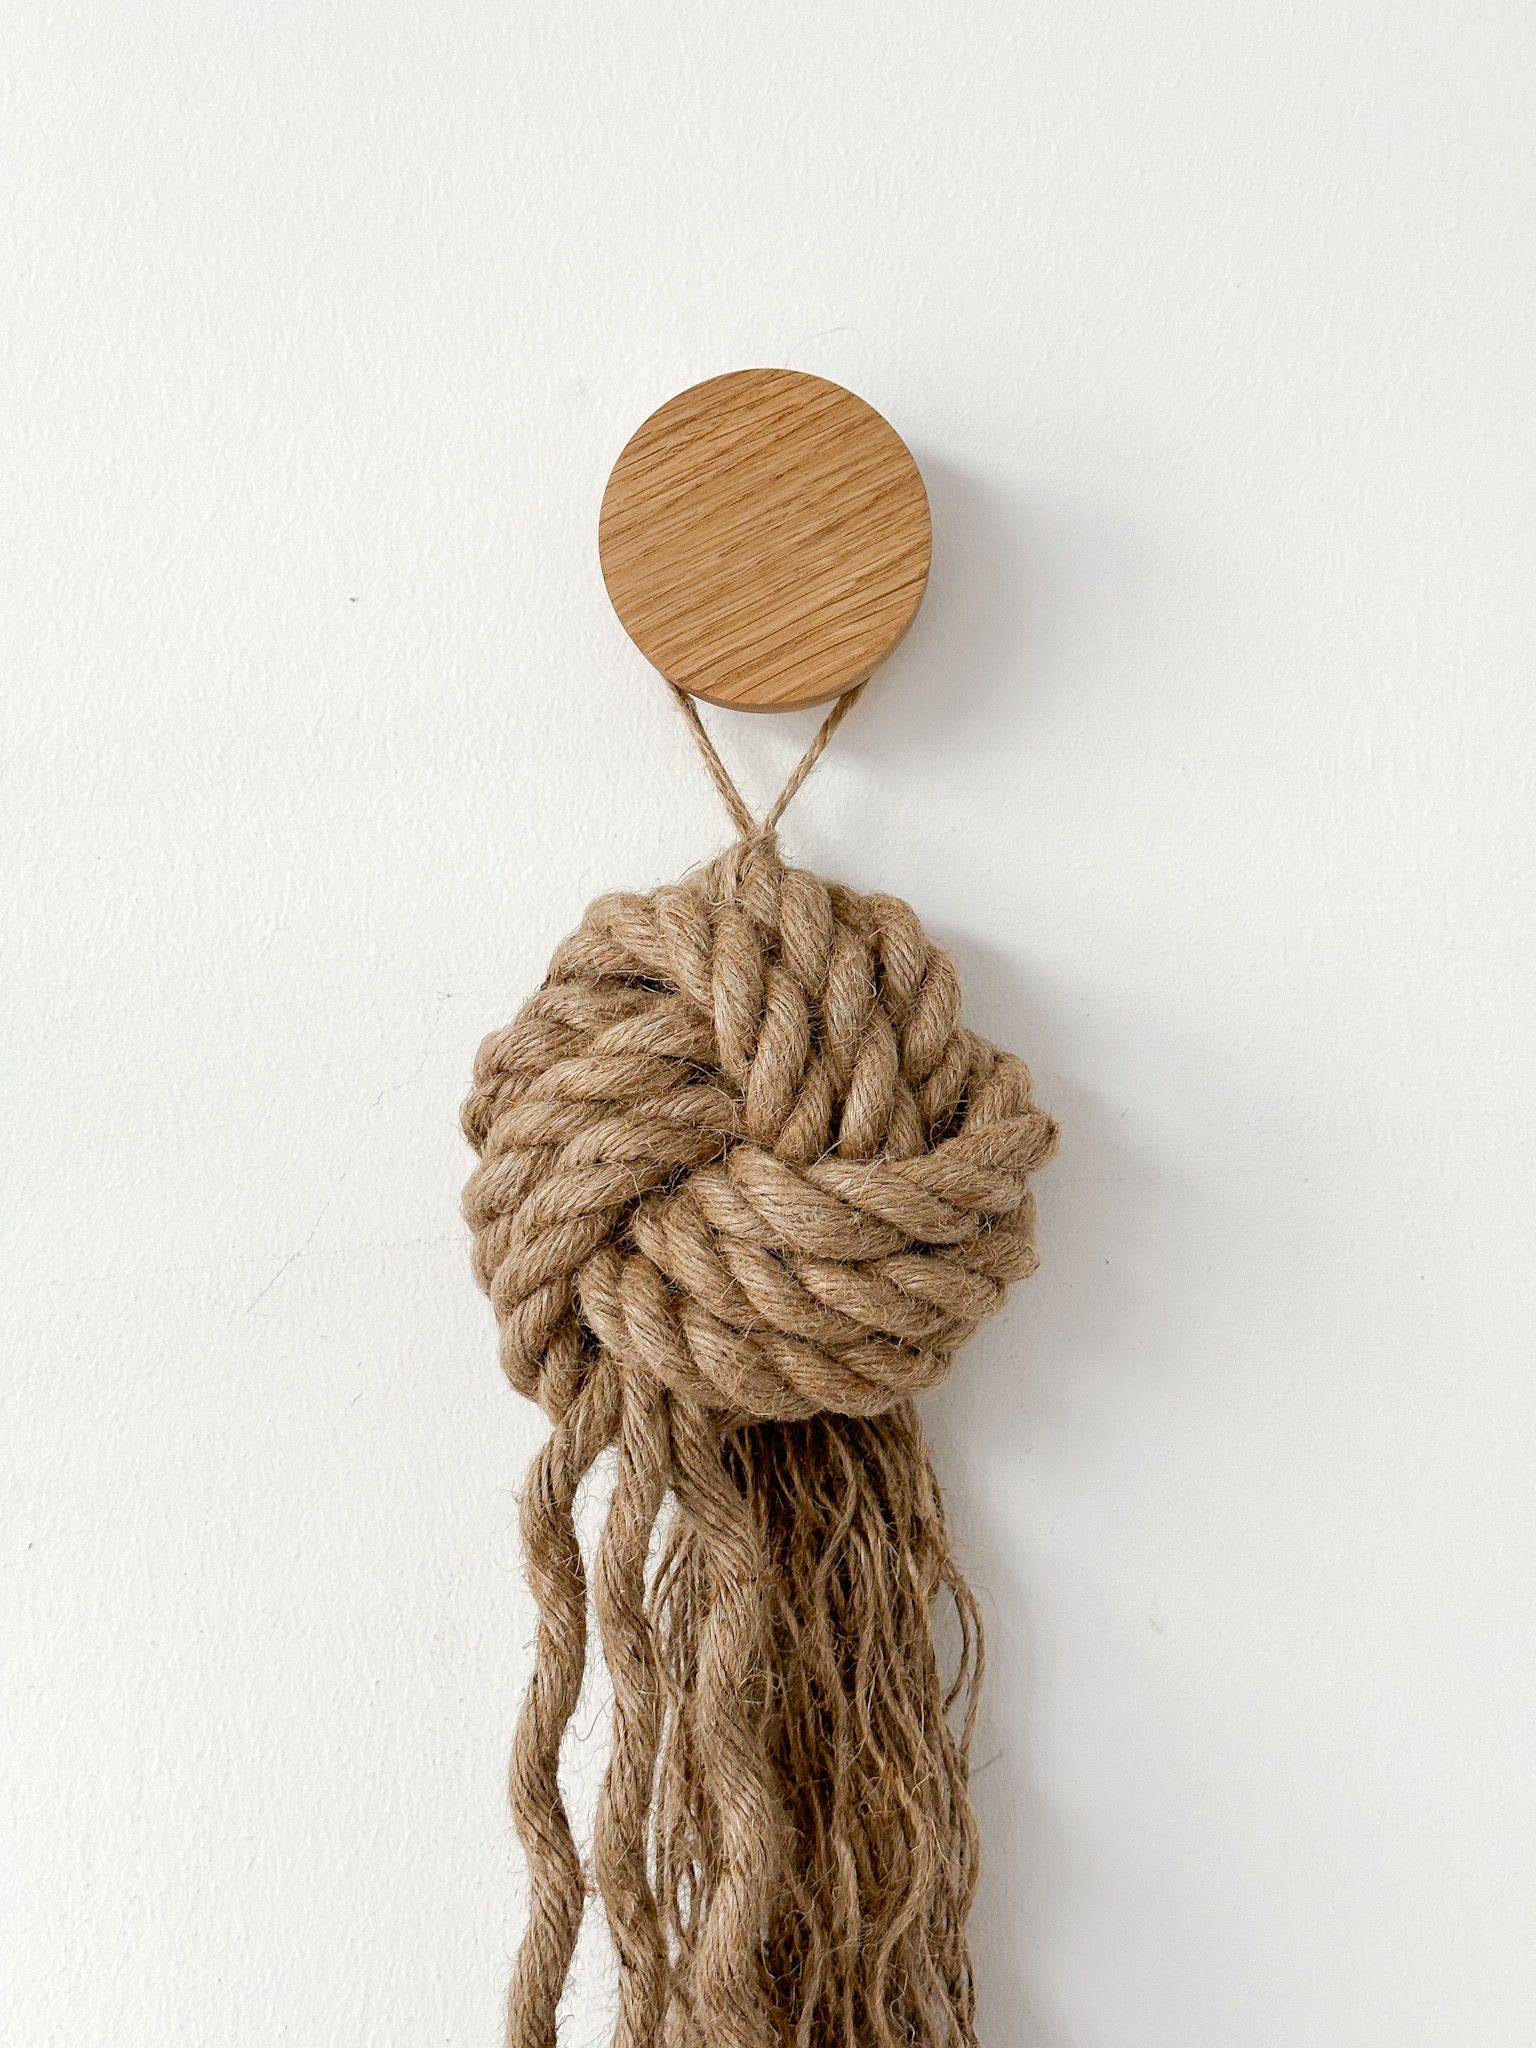 KNOT 006  Rope Sculpture Wall Hanging by Ana Salazar Atelier